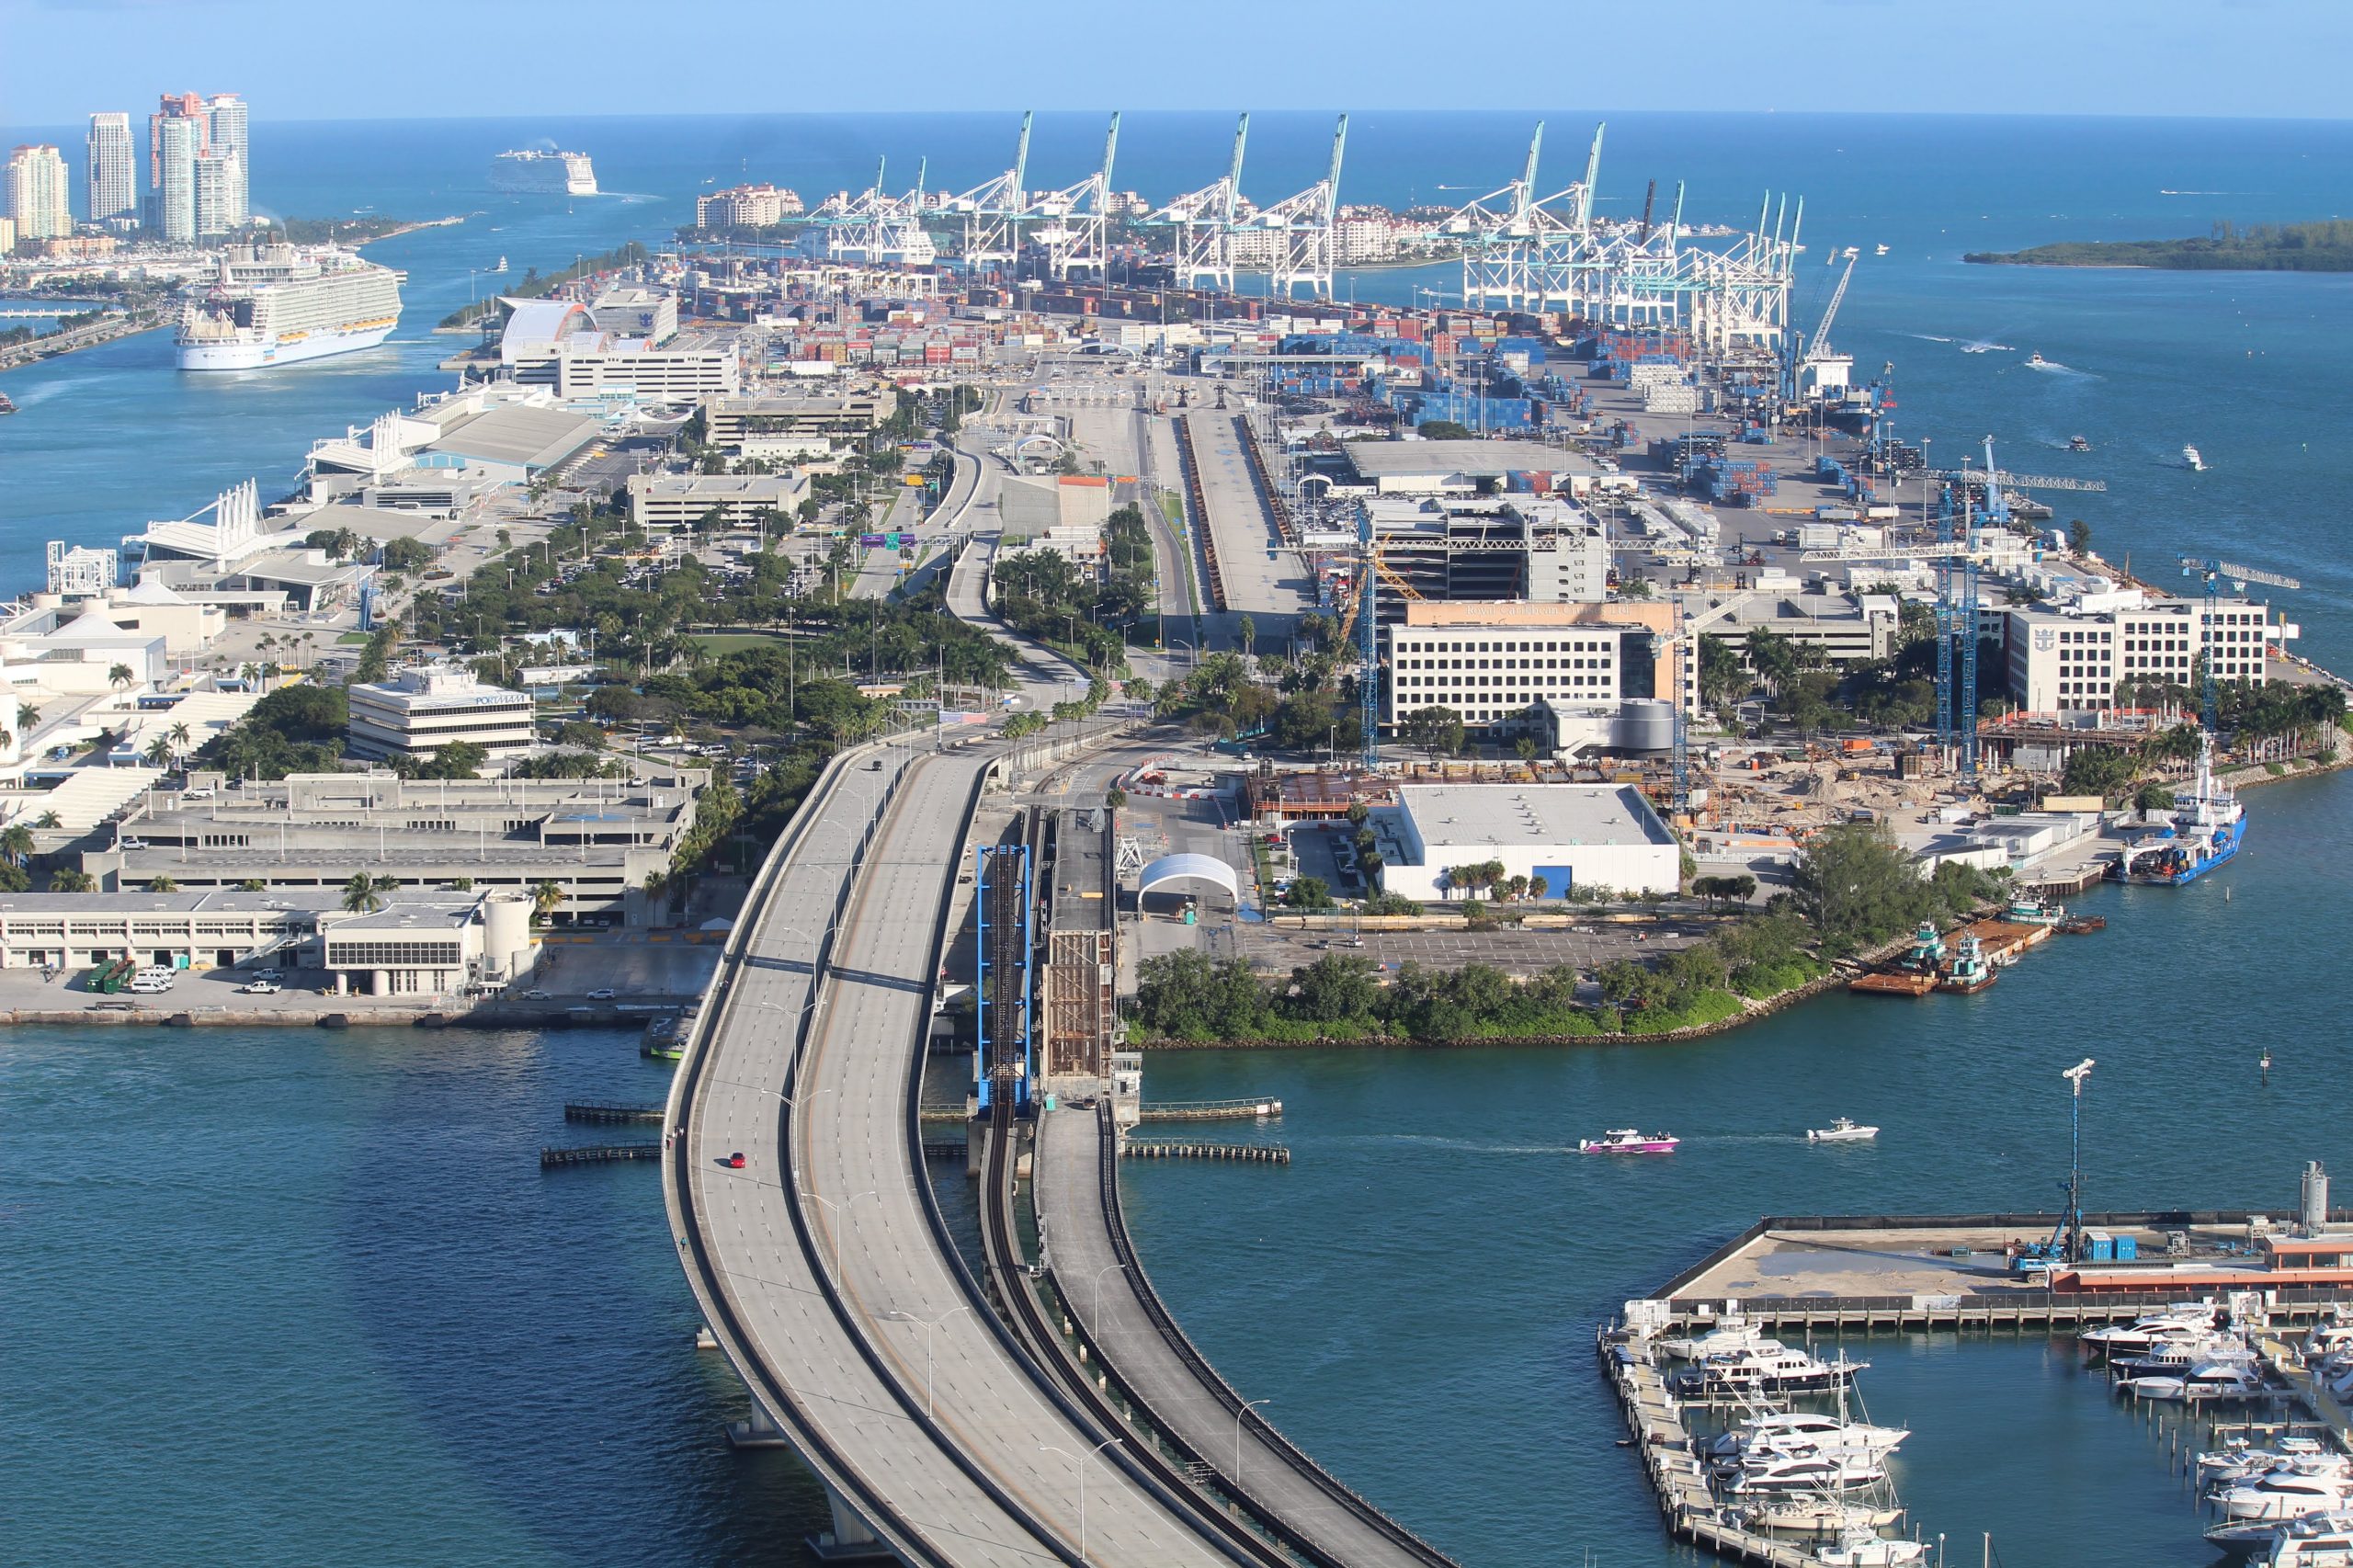 The Splendor of Downtown Miami Skyline and the Port of Miami… so Worthy of a Visit.